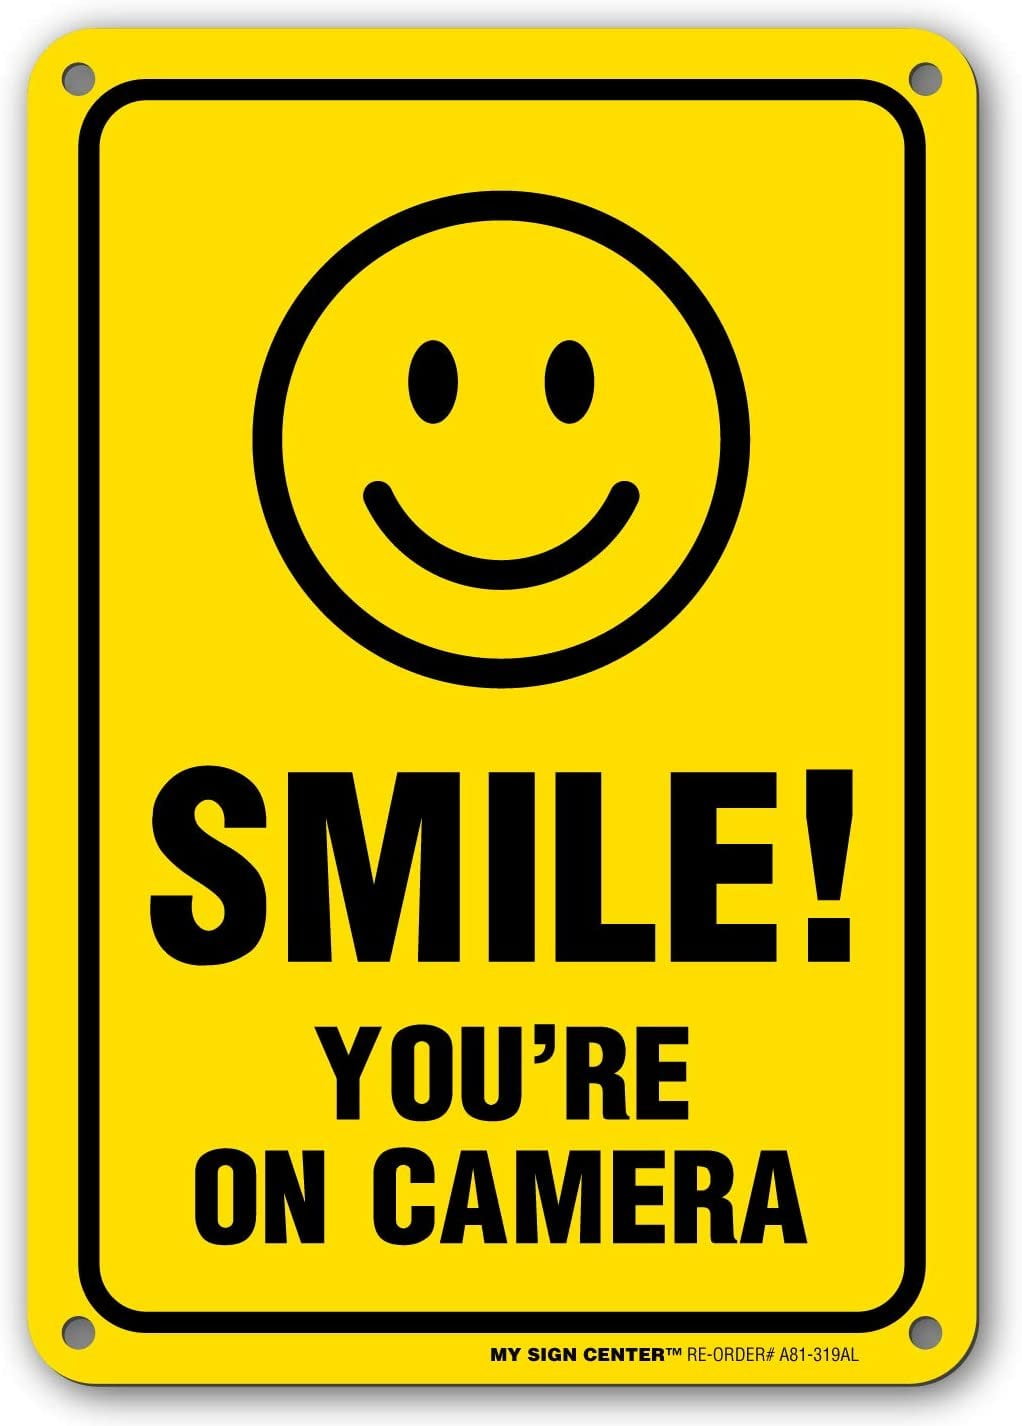 SECURITY WARNING STICKERS DECALS SIGNS SMILE VIDEO SURVEILLANCE IN USE HOME AUTO 